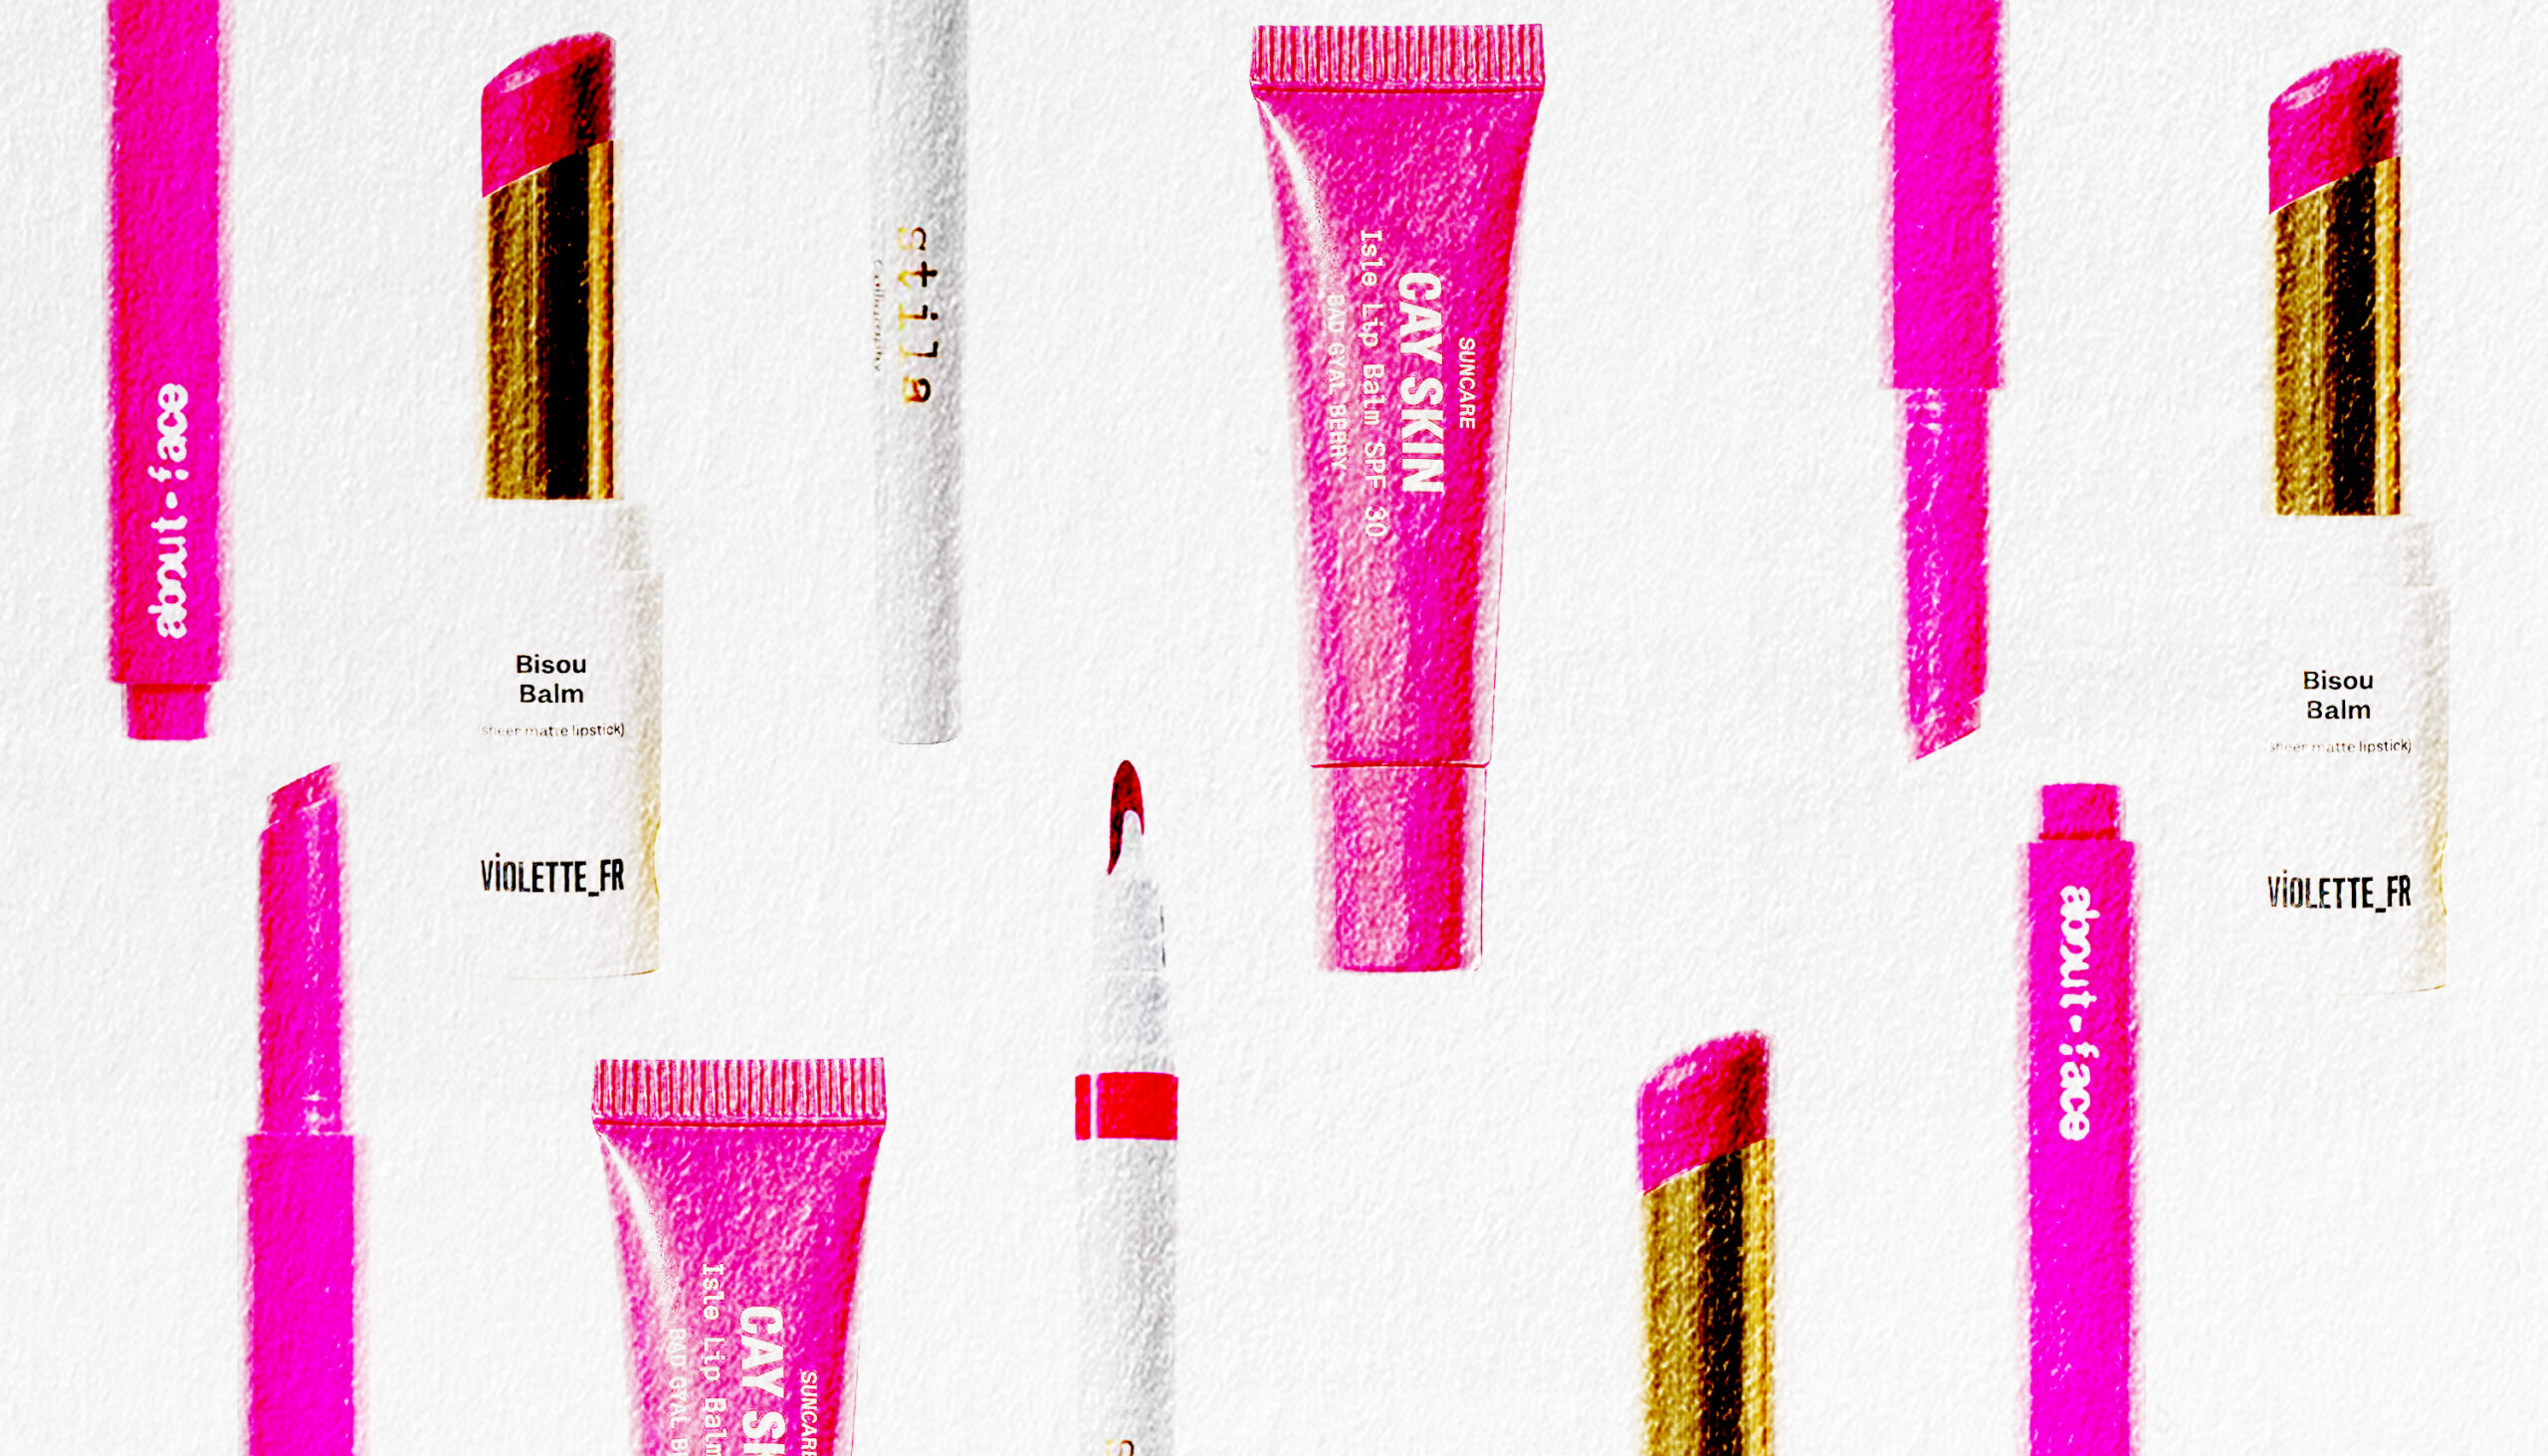 , 8 Lip Stains and Balms to Try for That “Just Ate a Popsicle” Look